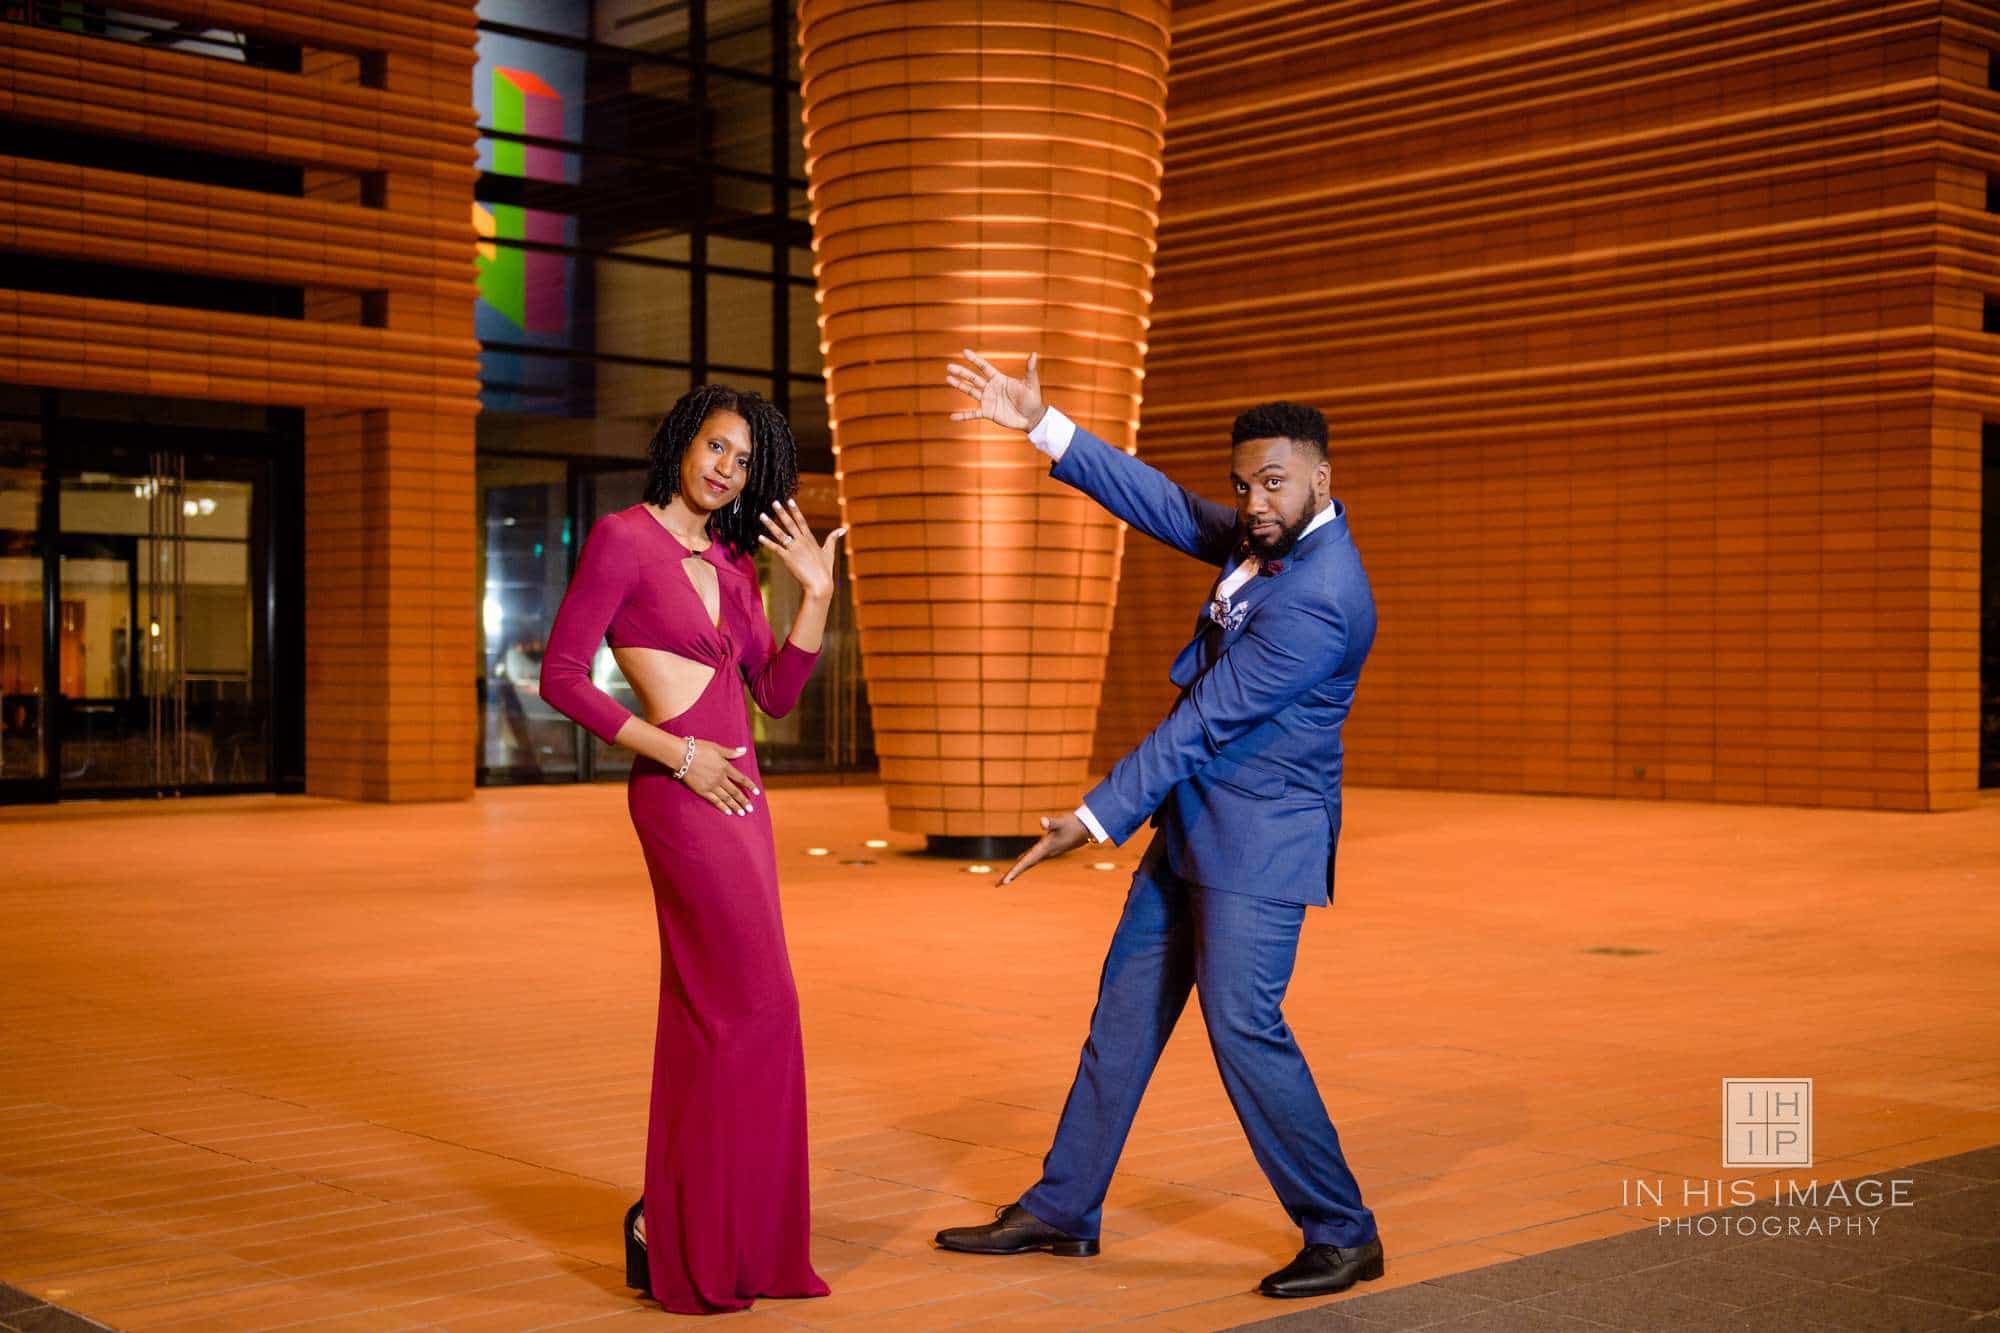 The Bechtler Museum Engagement Session